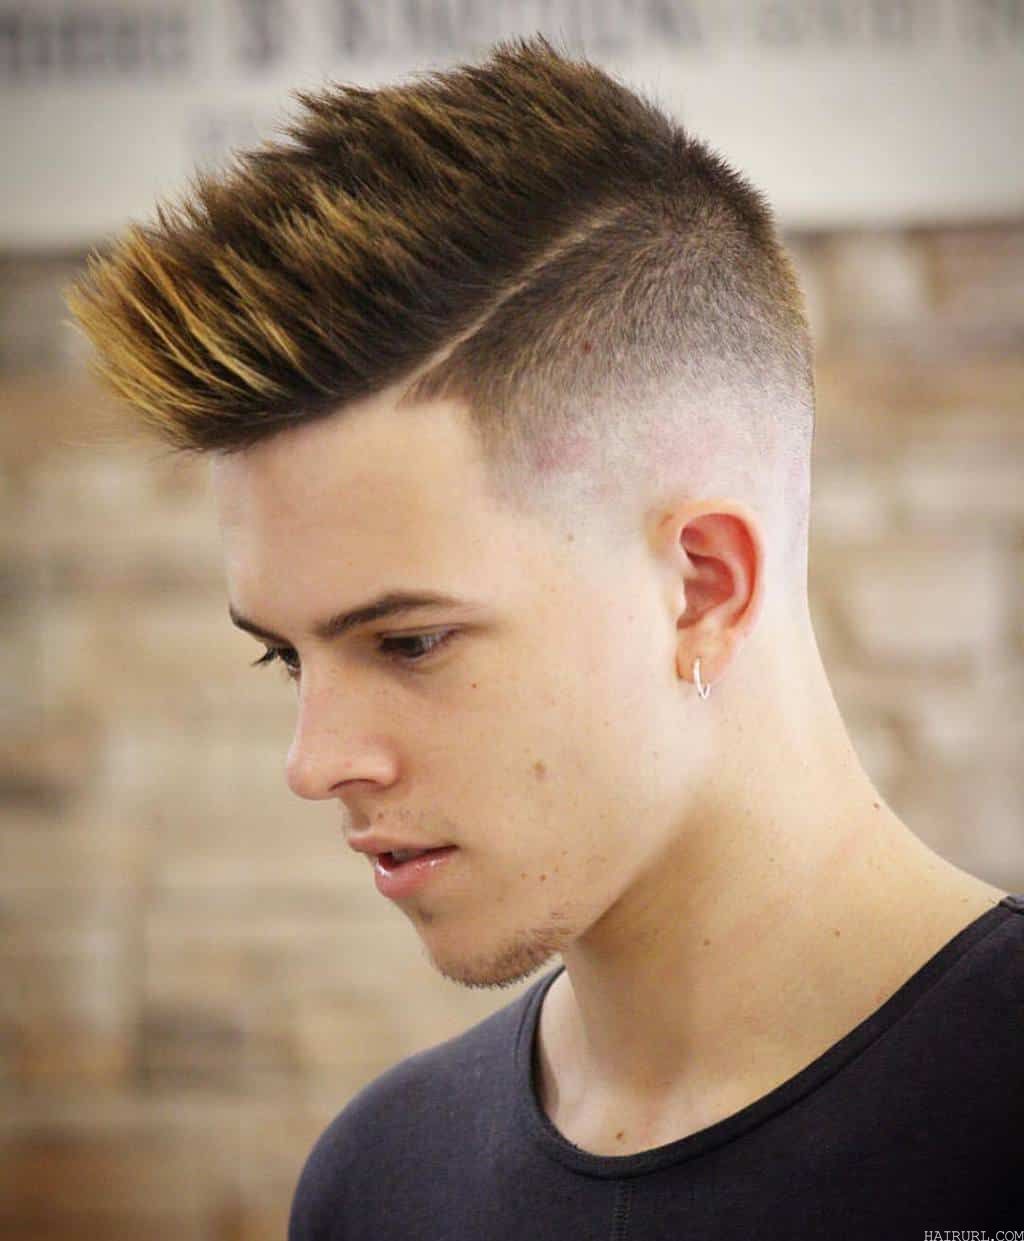 Taper Fade Undercut hairstyle for young boy